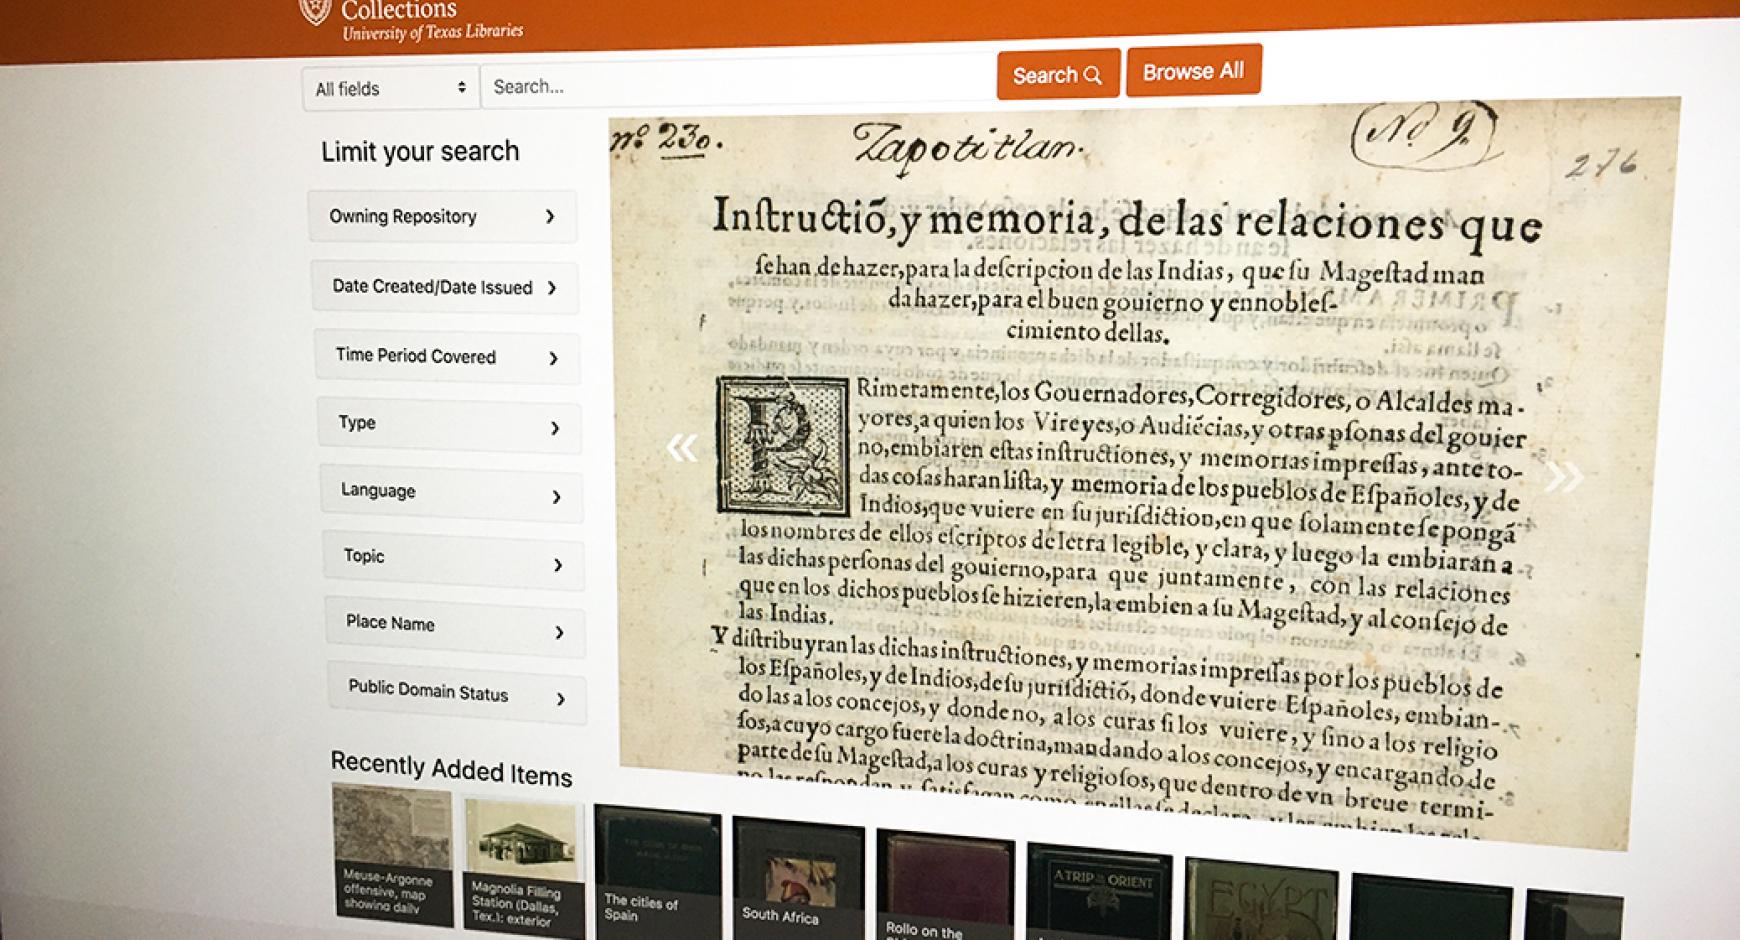 Image is of a website from The University of Texas Libraries digital collections, funded by the Mellon grant.